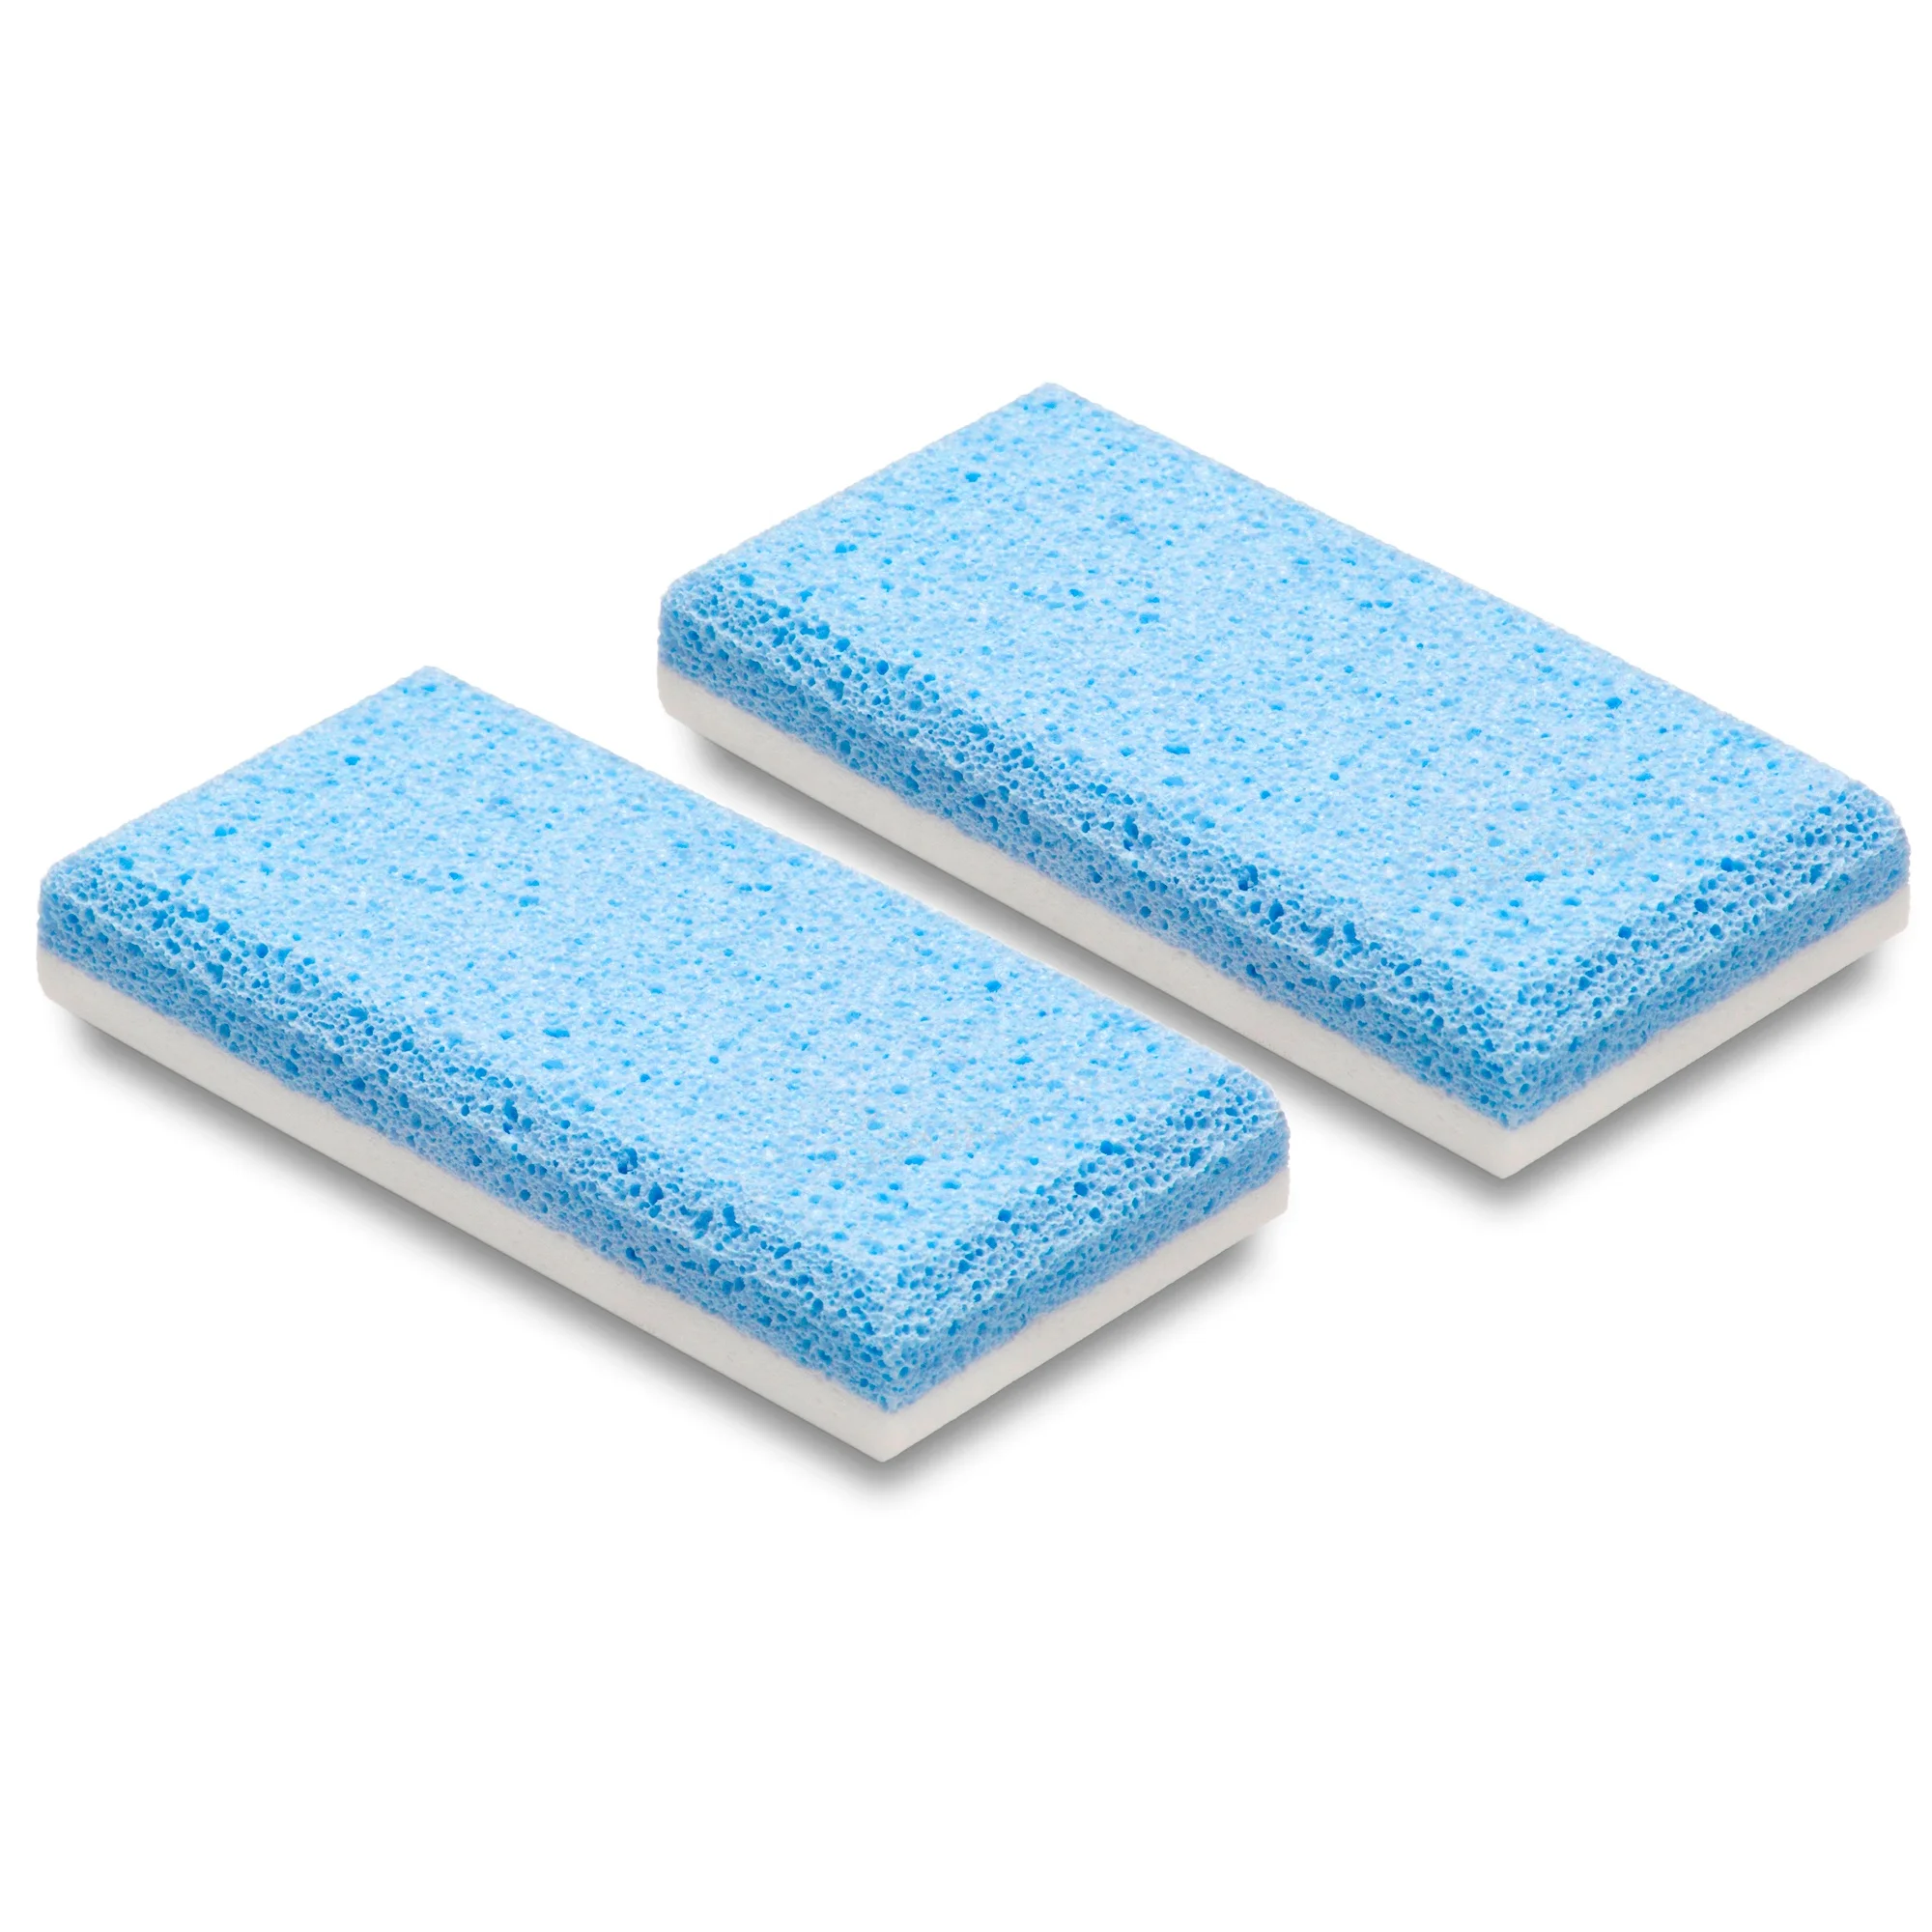 Pumice stone dual action – Calidad premium – Only manufacturer in the world that makes this pumice stone in one piece.